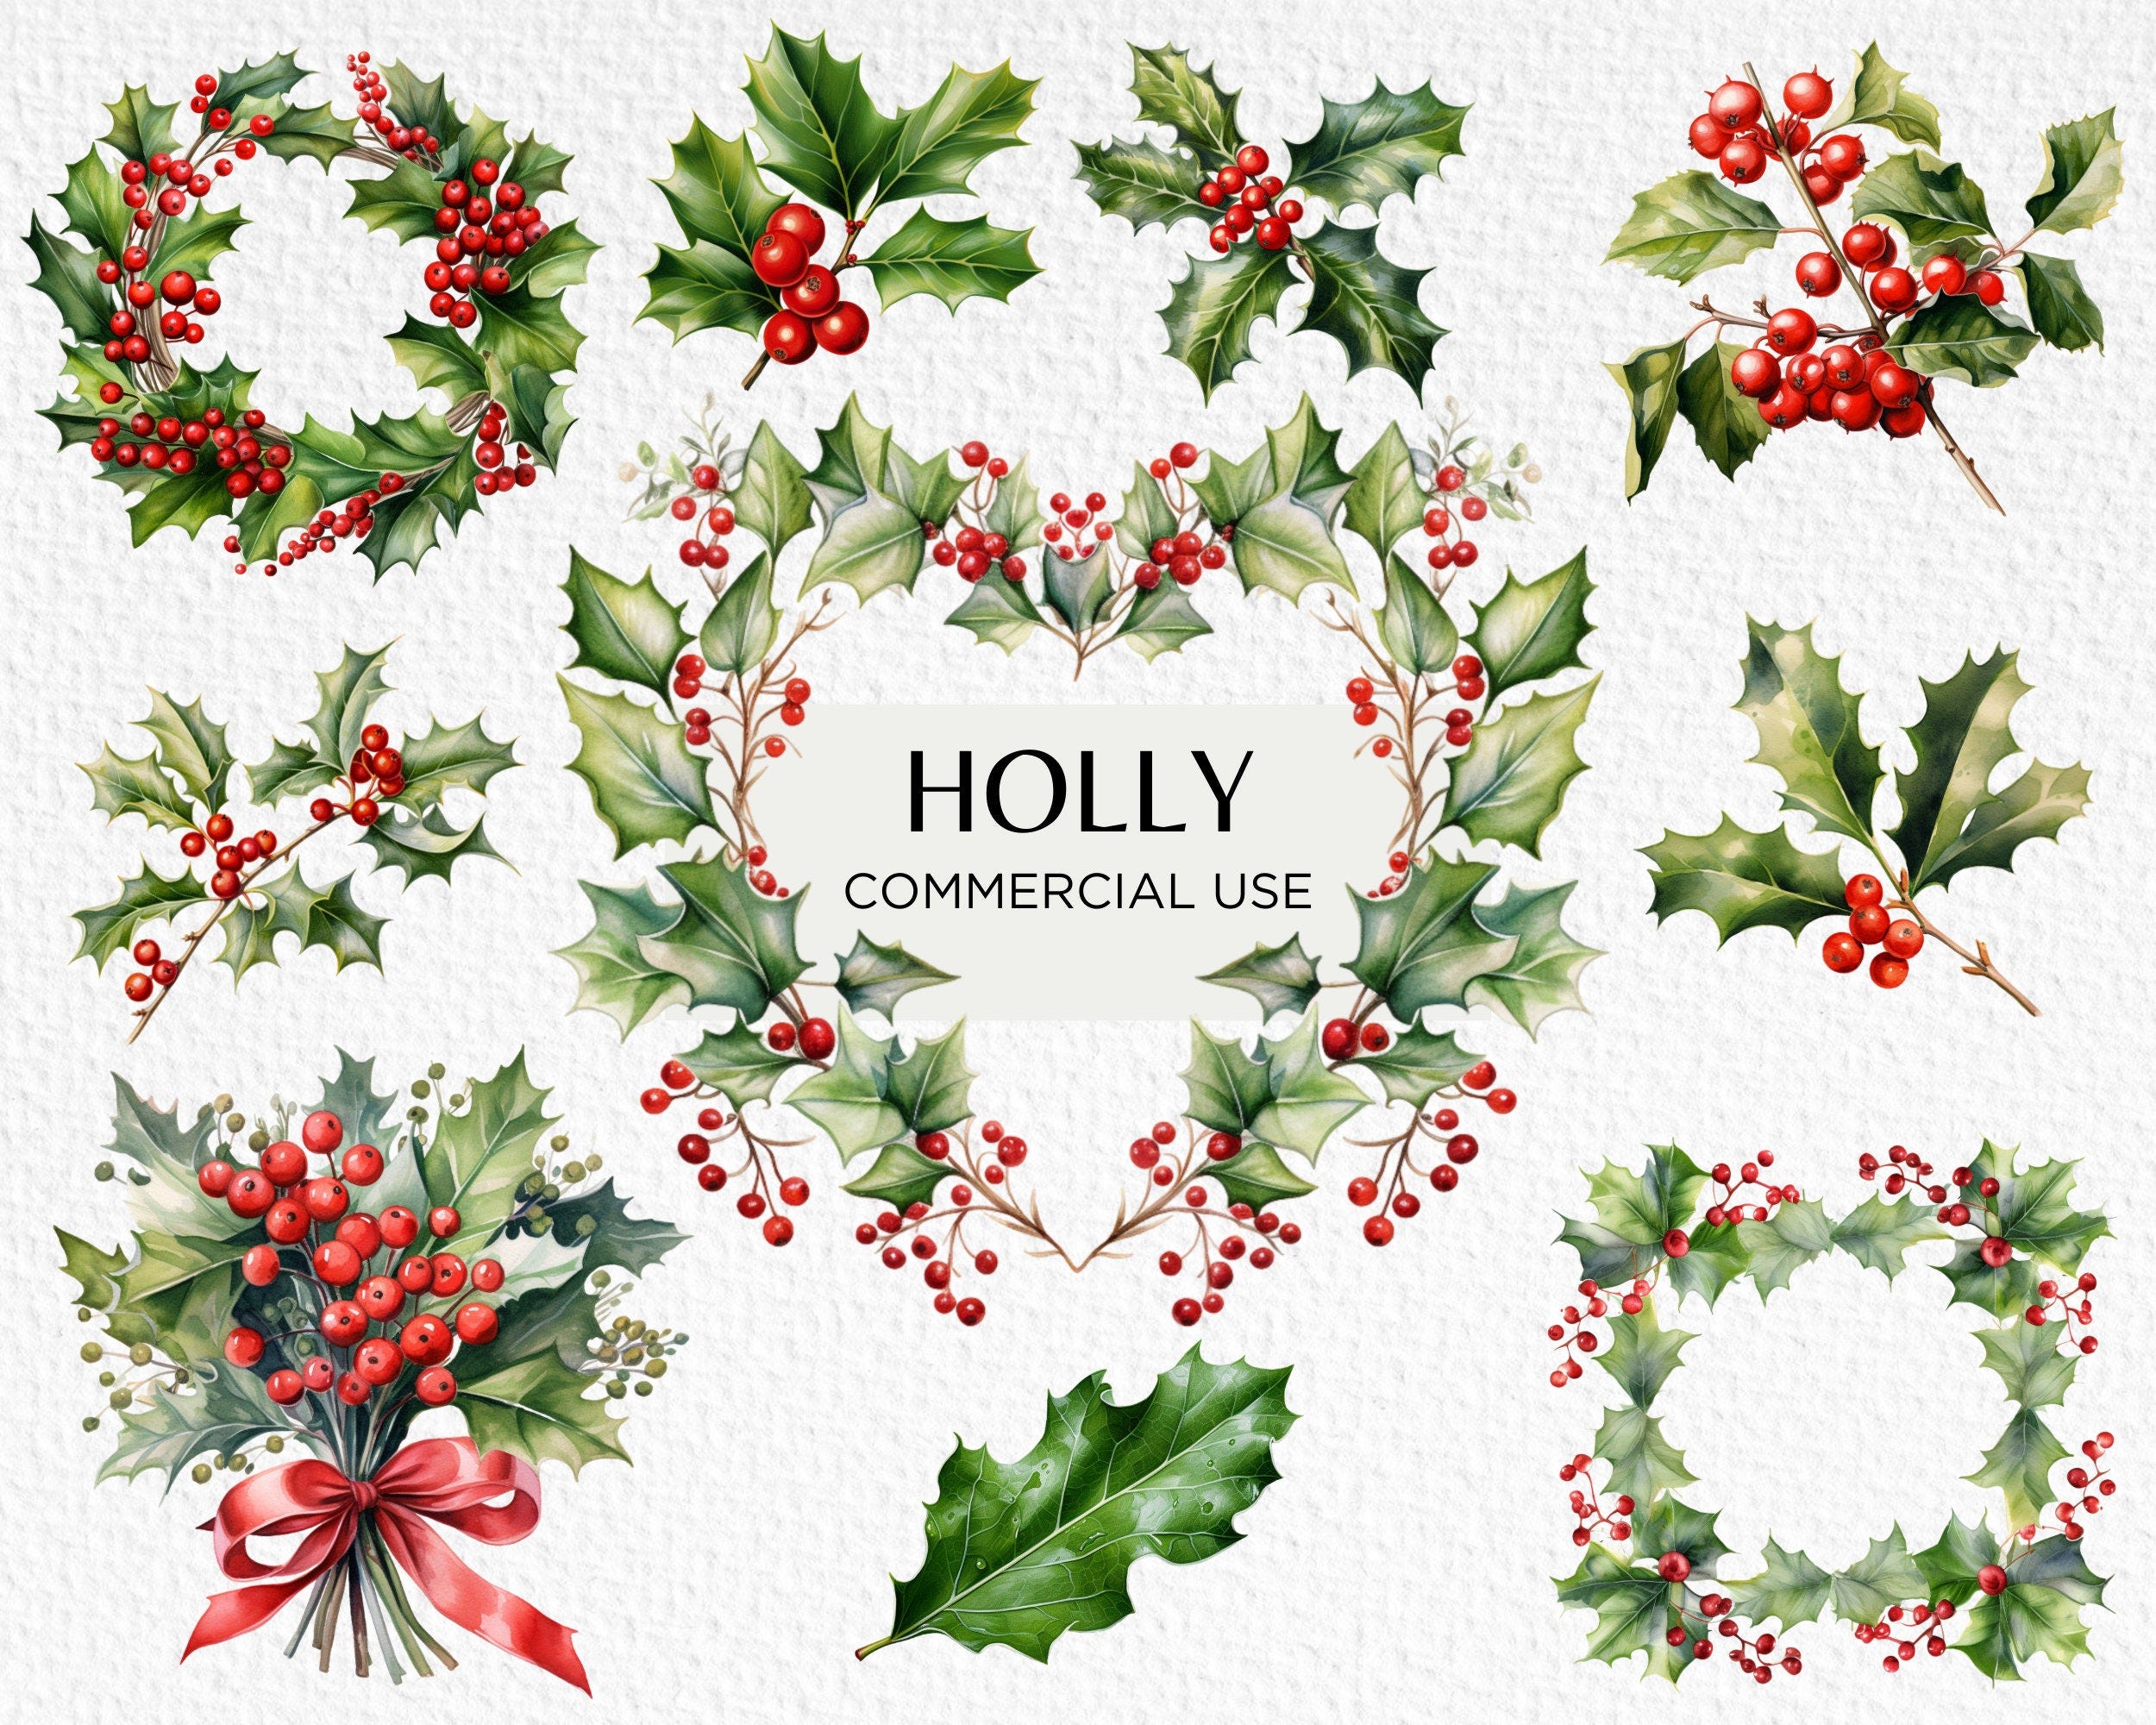 Holly Watercolour Clipart, 10 Transparent PNG 300 dpi, Christmas Botanicals, Festive Foliage, Holly Wreath, Digital Download, Commercial Use